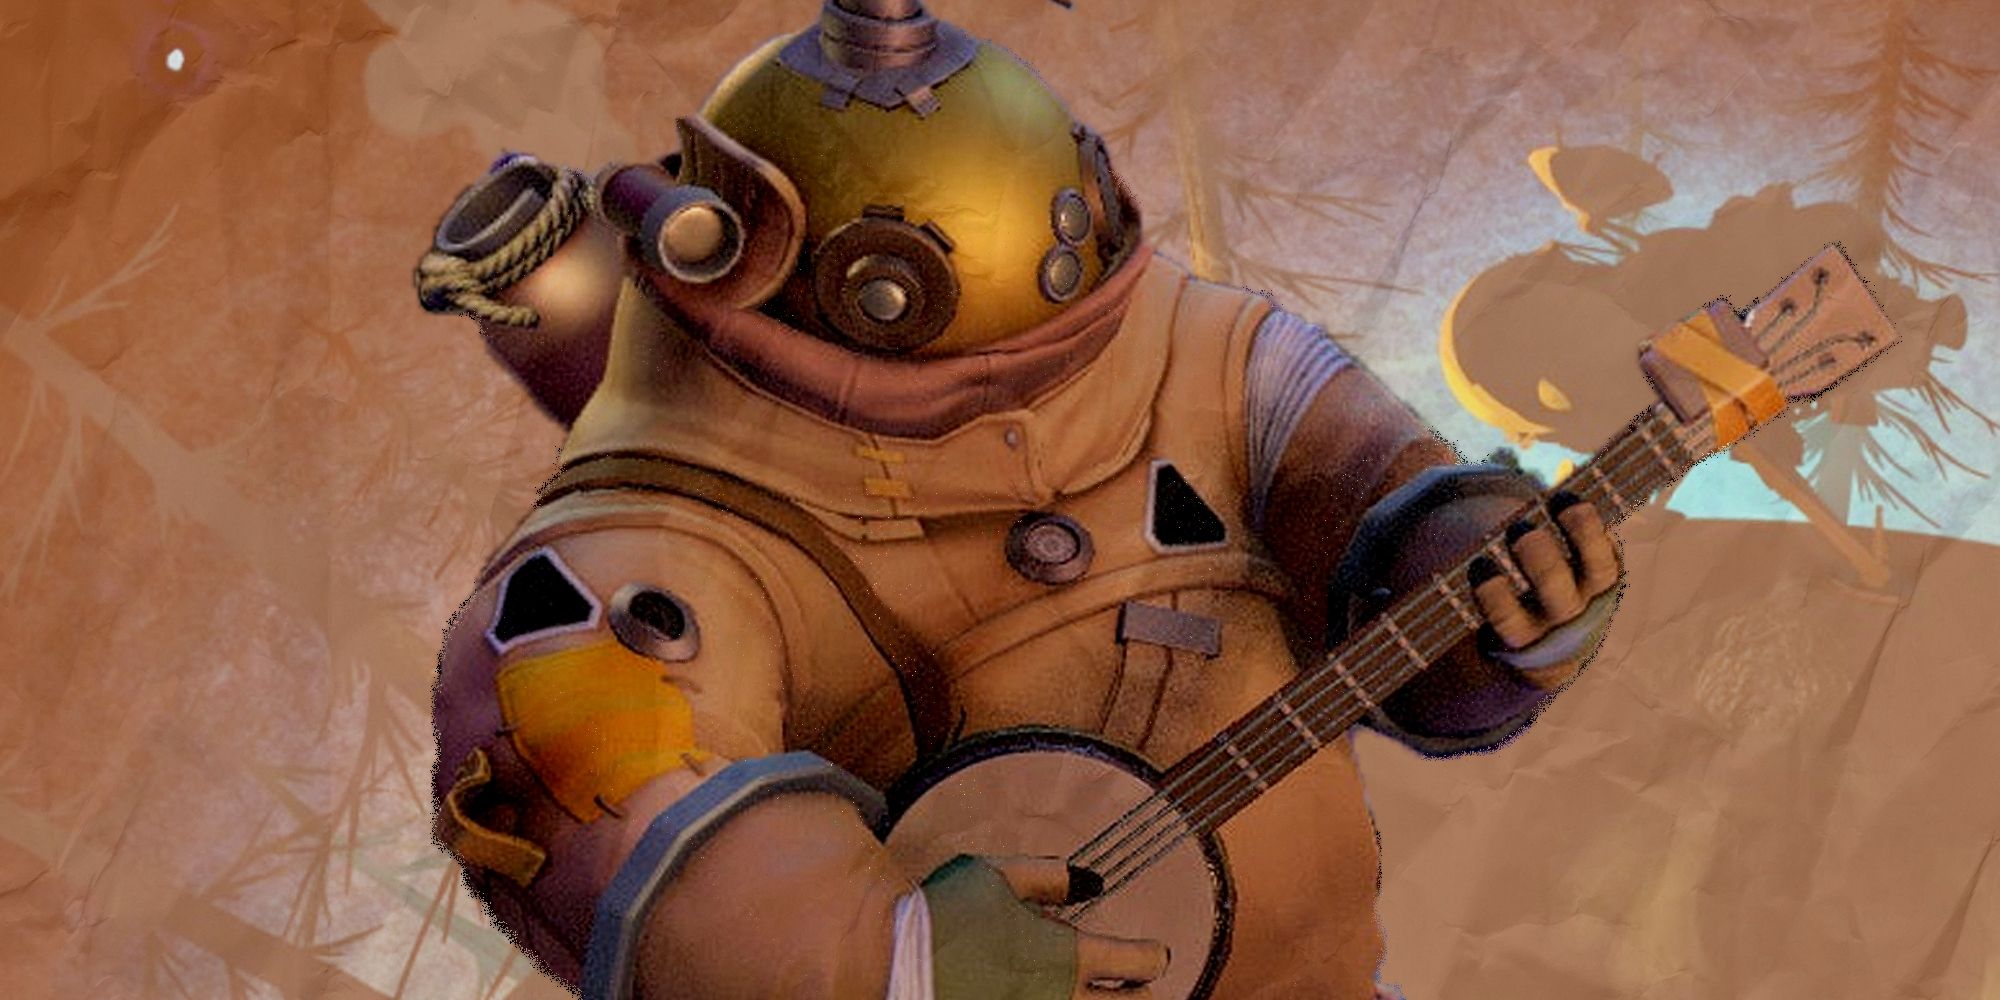 Outer Wilds' starts slow, but is quite and adventure